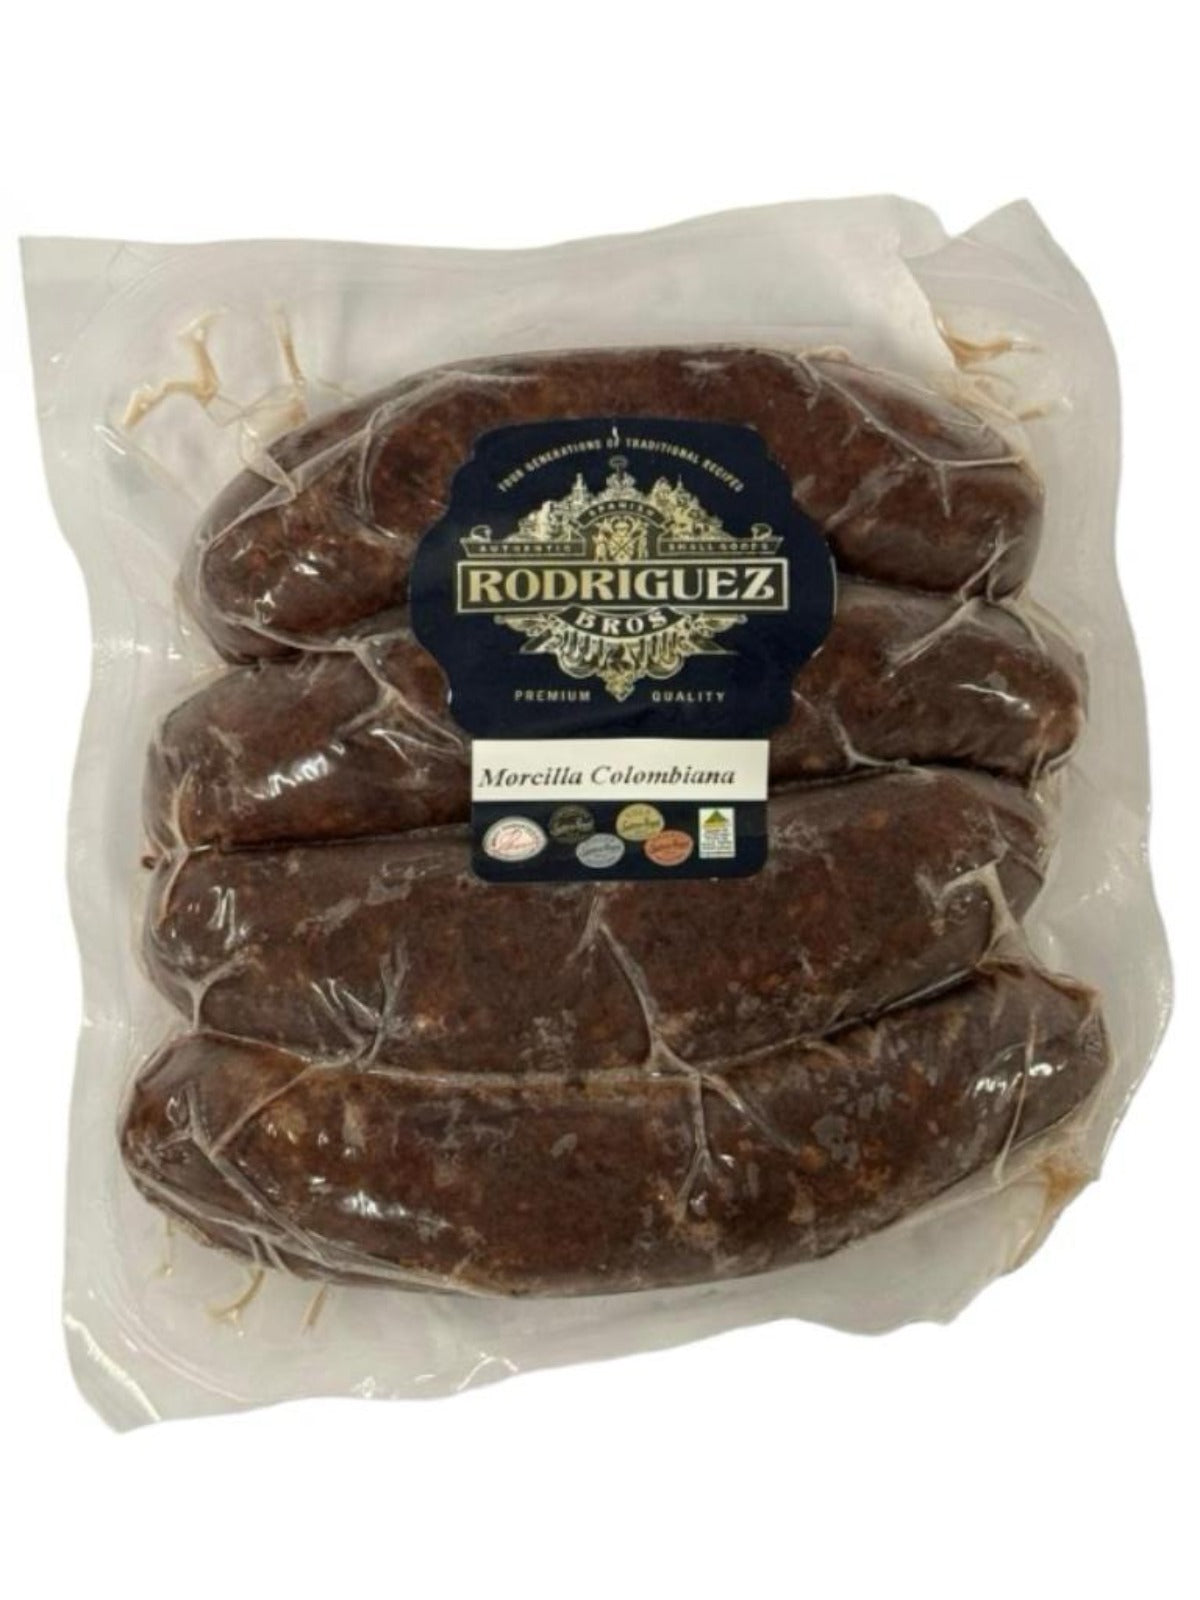 AVAILABLE IN STORE ONLY FROZEN - Morcilla Colombiana (rice) 4 piece pack frozen